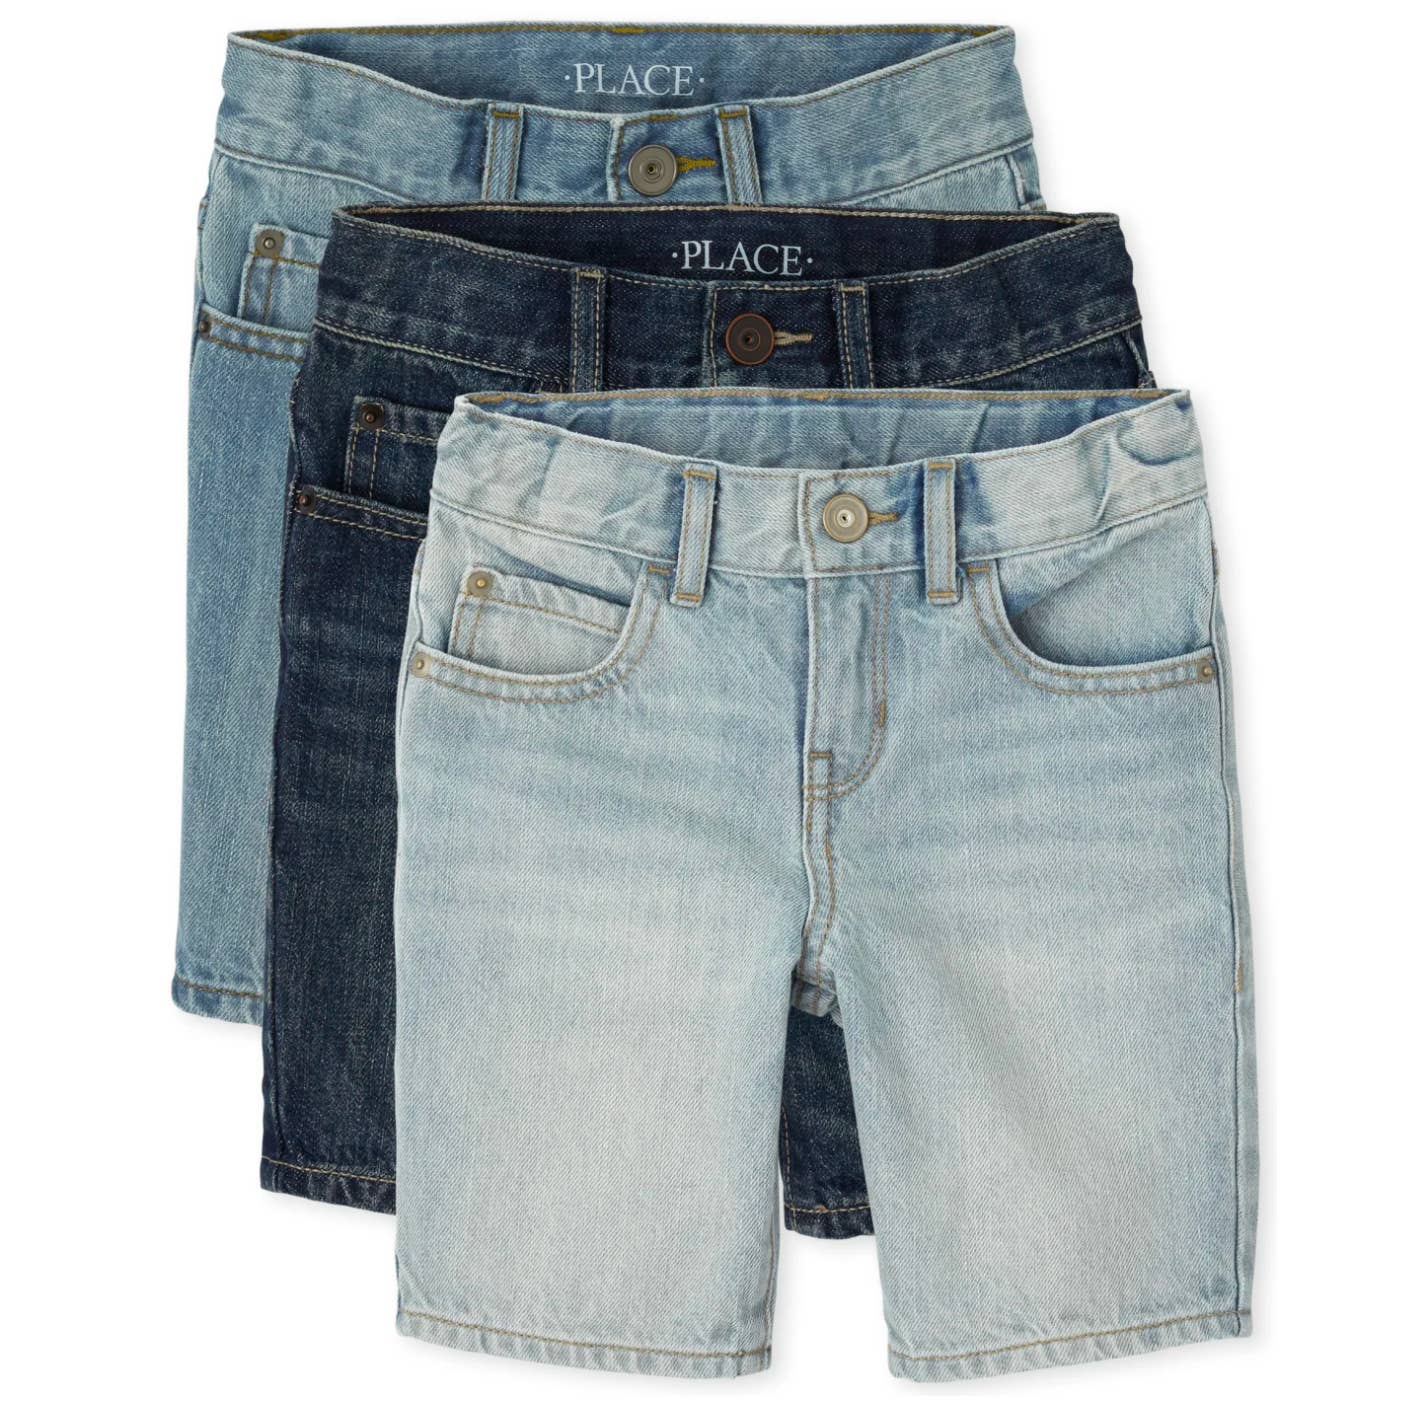 The Childrens Place Boys Denim Shorts 3-Pack